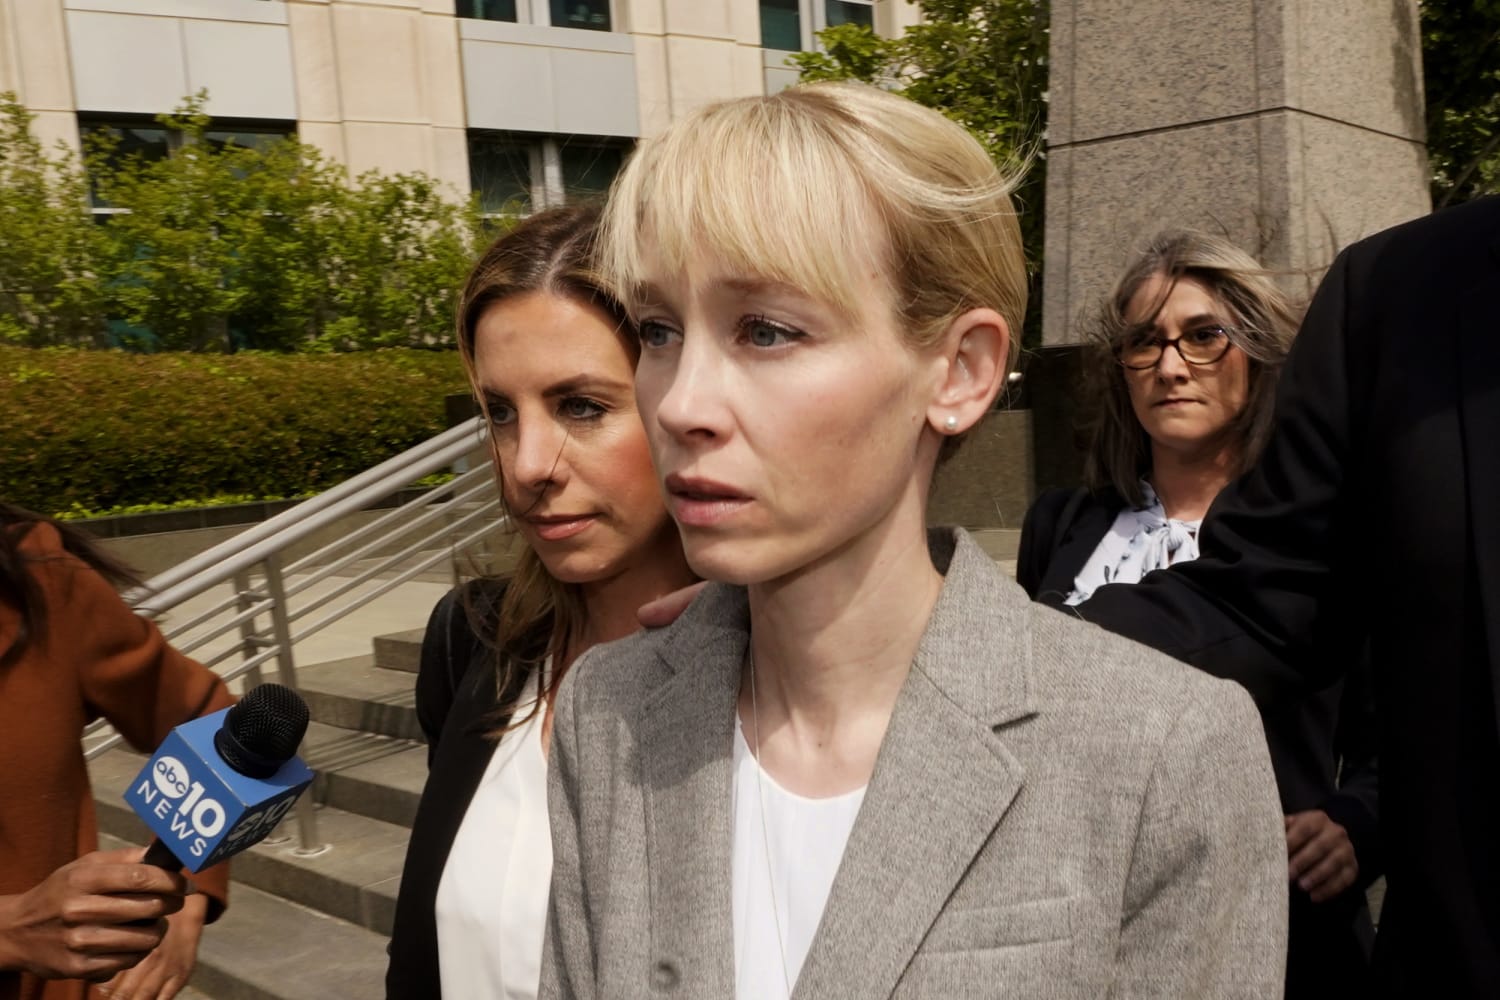 Sherri Papini, who faked her own kidnapping, is released from federal prison